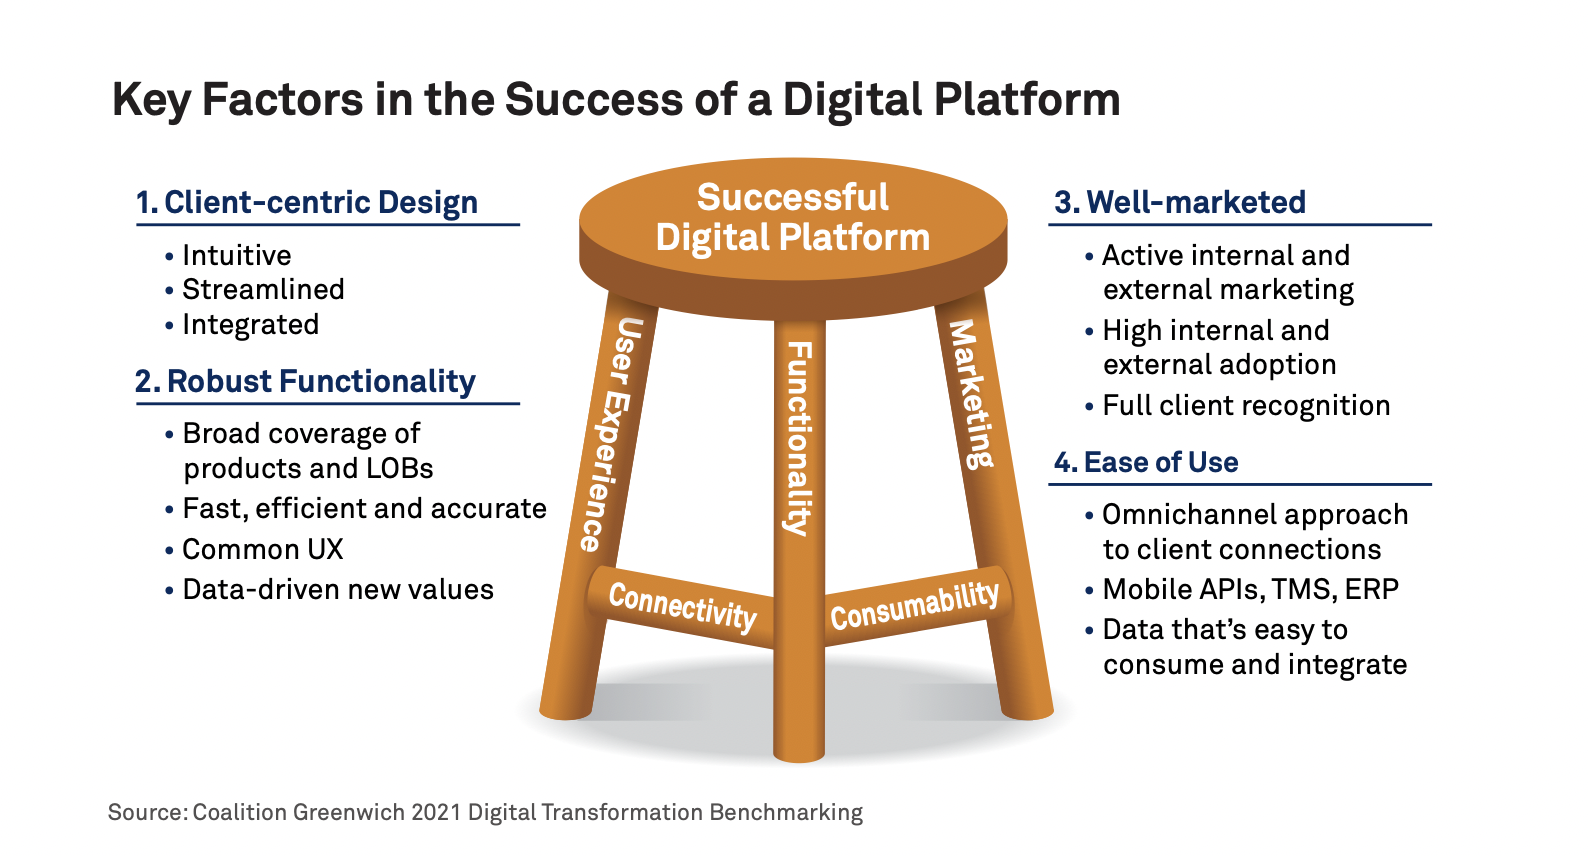 Key Factors in the Success of a Digital Platform. 1. Client-centric design, intuitive, streamlined, integrated. 2. Robust functionality, broad coverage of products and LOBs, fast, efficient and accurate, common UX, data-driven new values. 3. Well-marketed. 4. Ease of use, omnichannel approach to client connections, mobile APIs, TMS, ERP, Data that's easy to consume and integrate